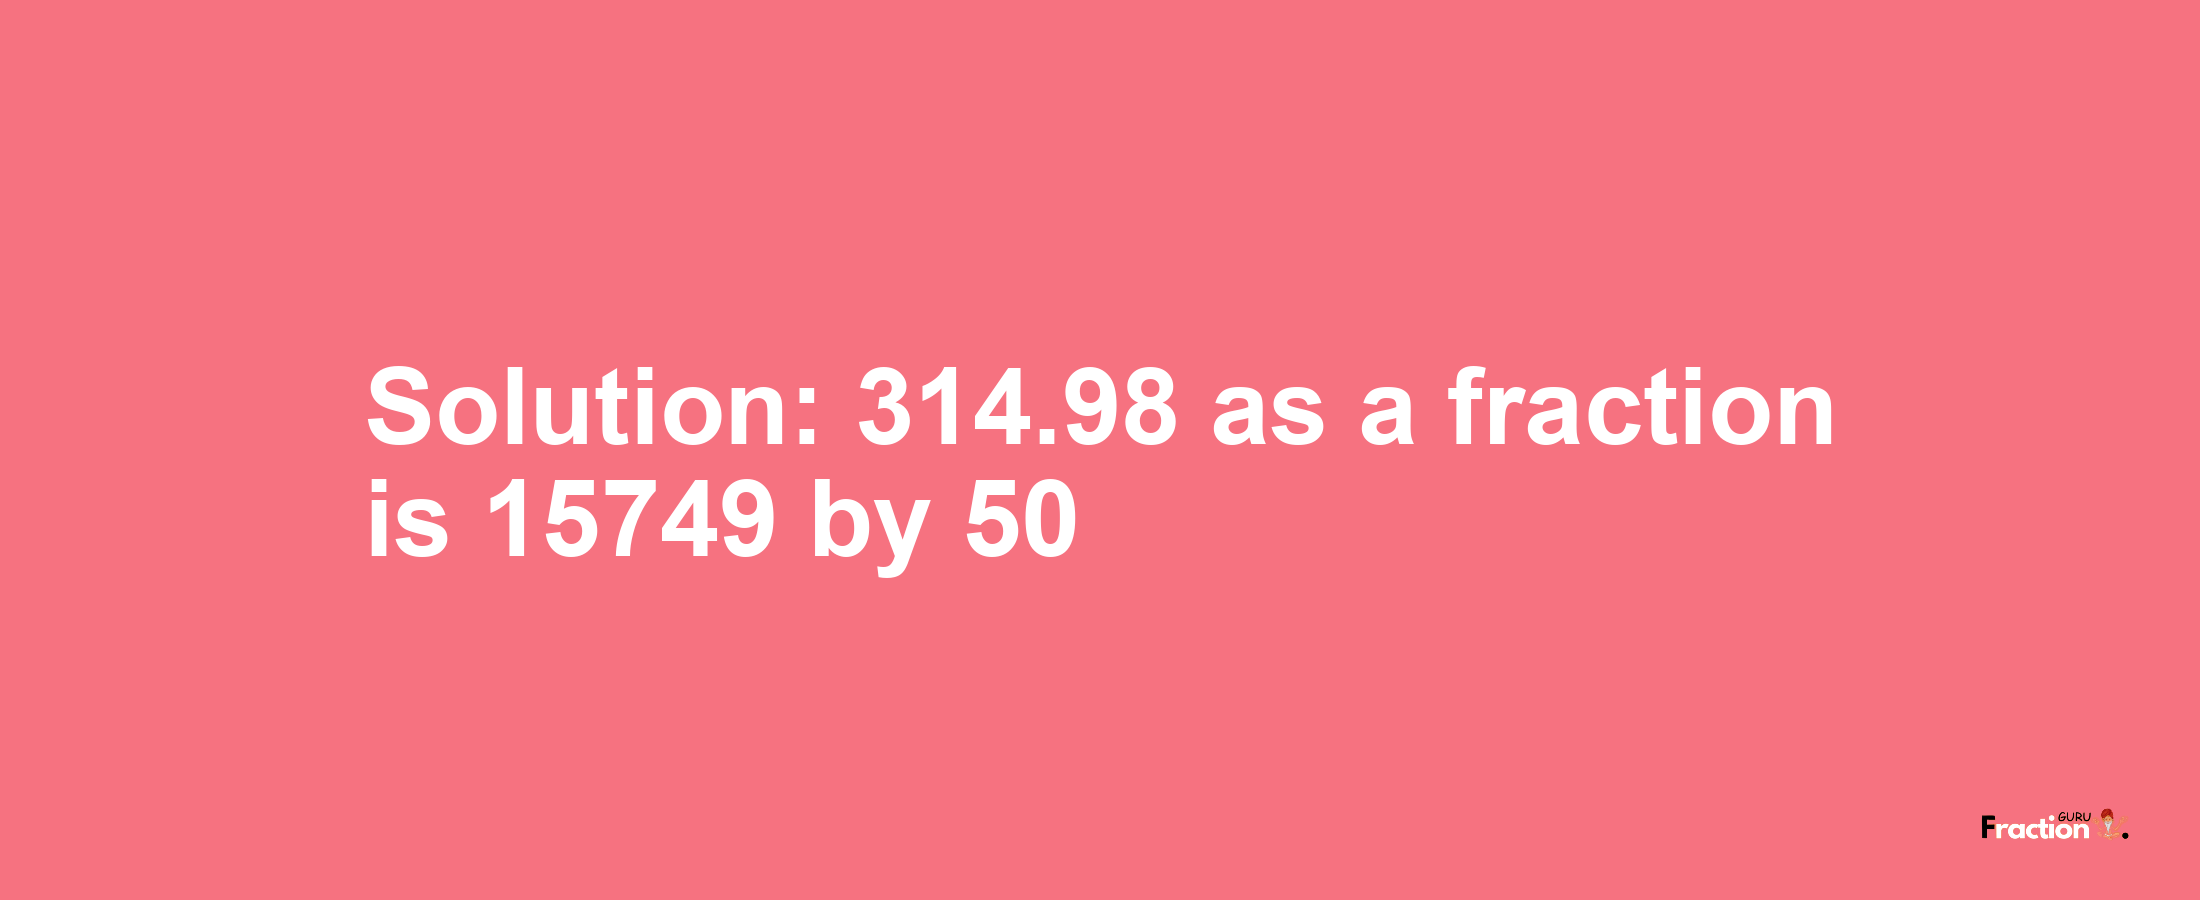 Solution:314.98 as a fraction is 15749/50